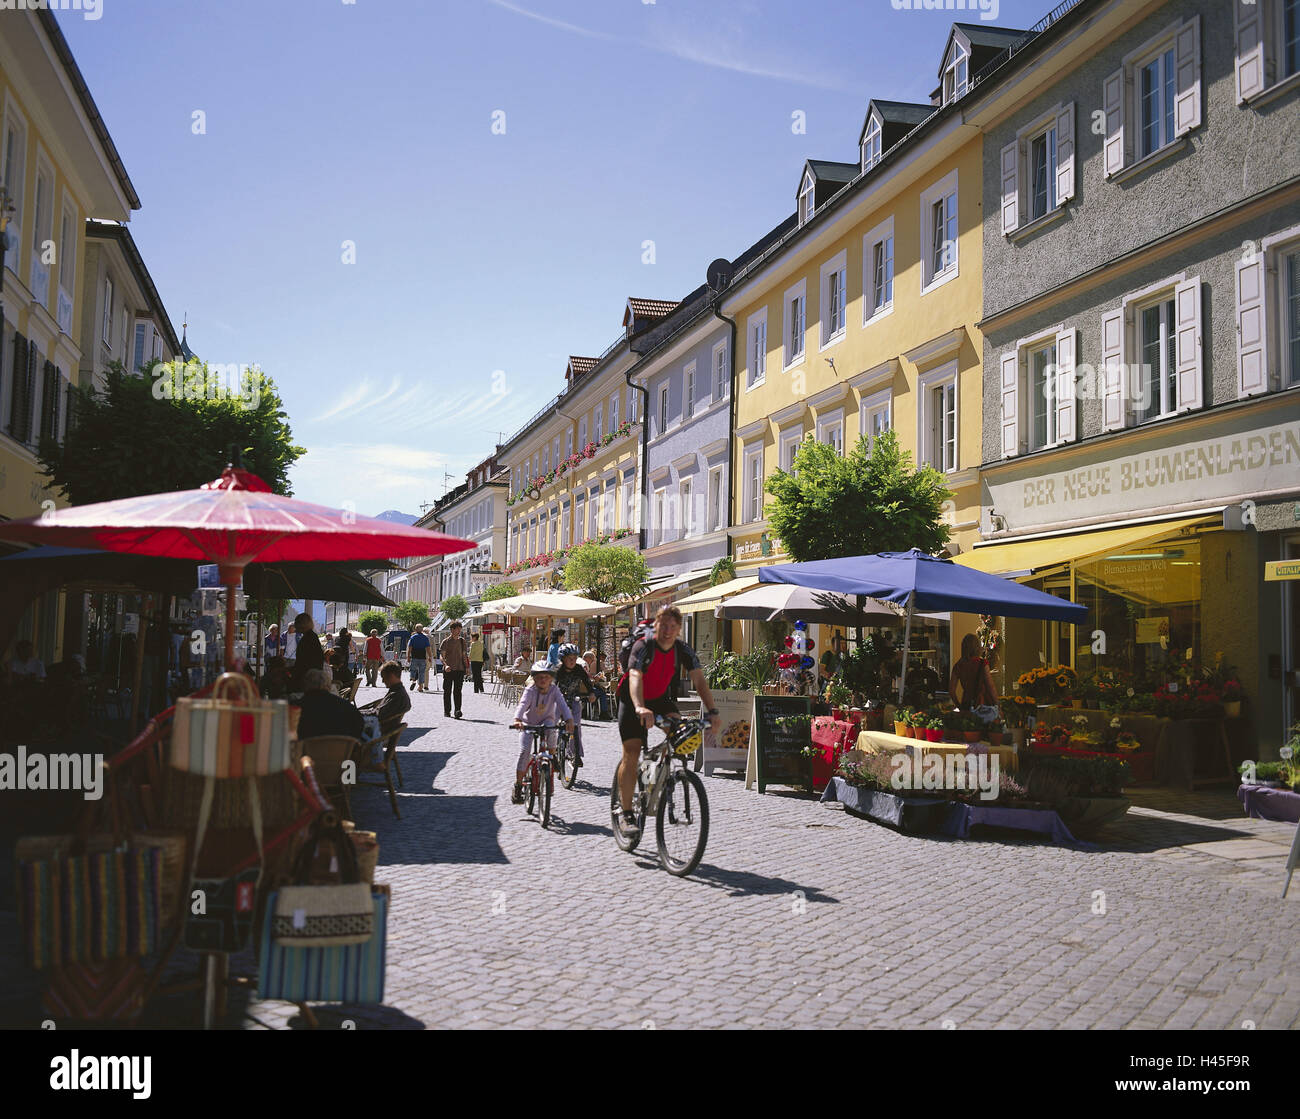 Germany, Bavaria, Murnau in the series lake, Marktstrasse, Upper Bavaria, city centre, street scene, cyclist, bicycle, houses, facade, shops, saunter, sunshades, flower shop, tourism, sales booths, shops, people, outside, house line, architecture, summer, sunny, Stock Photo